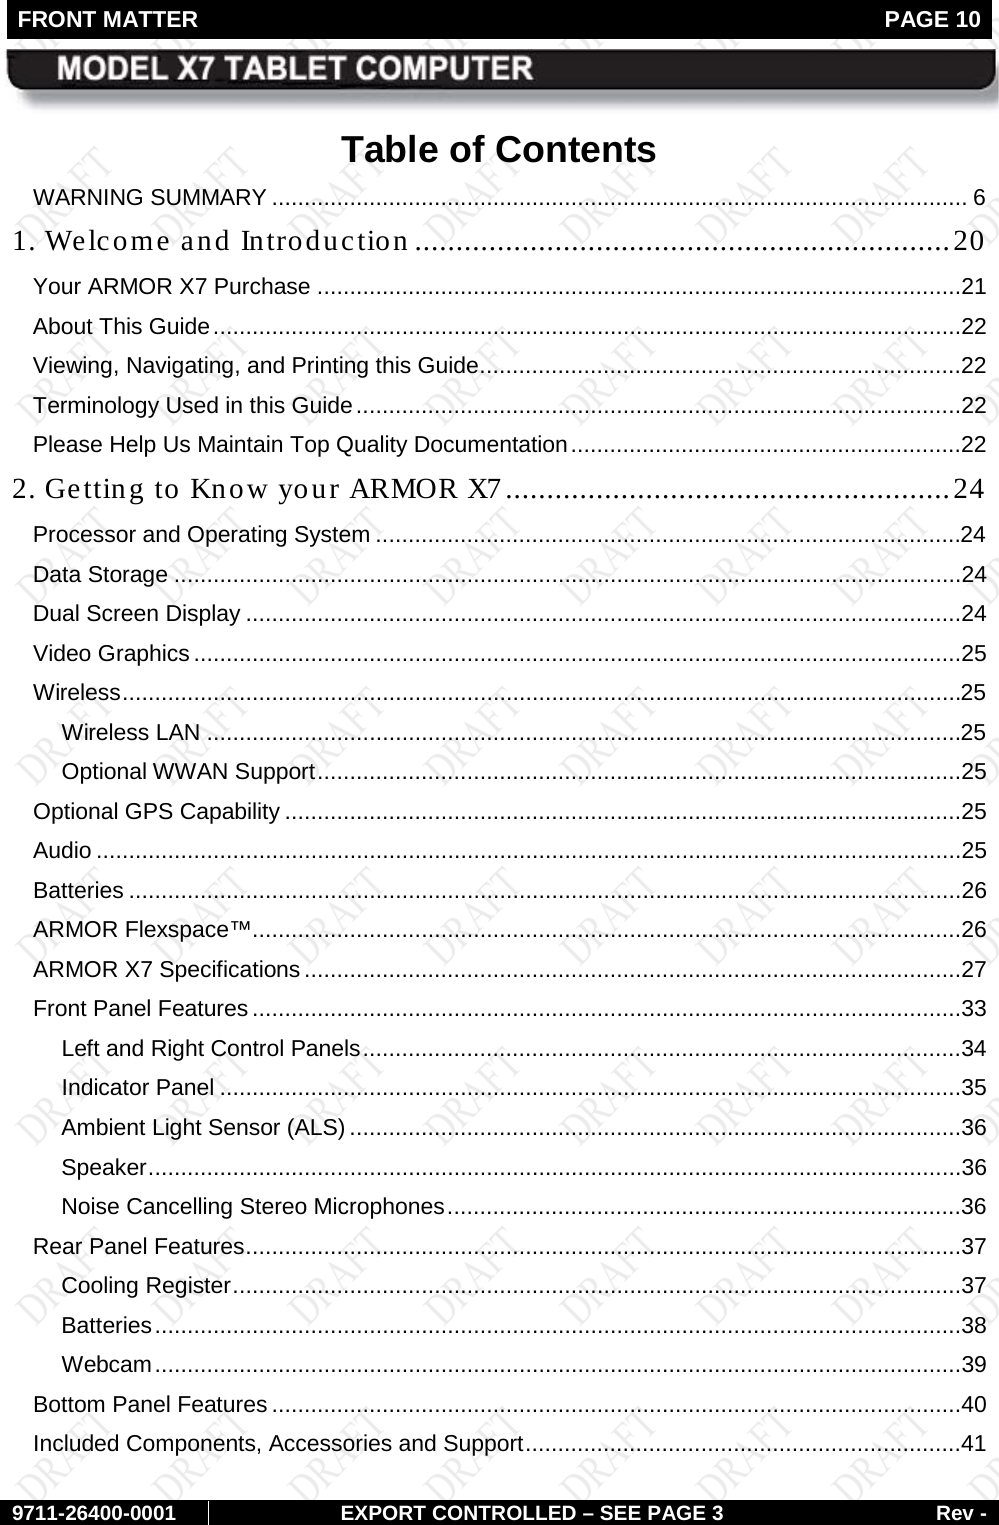 FRONT MATTER   PAGE 10        9711-26400-0001 EXPORT CONTROLLED – SEE PAGE 3 Rev - Table of Contents WARNING SUMMARY ........................................................................................................... 6 1. Welcome and Introduction ................................................................. 20 Your ARMOR X7 Purchase ...................................................................................................21 About This Guide ...................................................................................................................22 Viewing, Navigating, and Printing this Guide ..........................................................................22 Terminology Used in this Guide .............................................................................................22 Please Help Us Maintain Top Quality Documentation ............................................................22 2. Getting to Know your ARMOR X7 ...................................................... 24 Processor and Operating System ..........................................................................................24 Data Storage .........................................................................................................................24 Dual Screen Display ..............................................................................................................24 Video Graphics ......................................................................................................................25 Wireless .................................................................................................................................25 Wireless LAN ....................................................................................................................25 Optional WWAN Support ...................................................................................................25 Optional GPS Capability ........................................................................................................25 Audio .....................................................................................................................................25 Batteries ................................................................................................................................26 ARMOR Flexspace™.............................................................................................................26 ARMOR X7 Specifications .....................................................................................................27 Front Panel Features .............................................................................................................33 Left and Right Control Panels ............................................................................................34 Indicator Panel ..................................................................................................................35 Ambient Light Sensor (ALS) ..............................................................................................36 Speaker .............................................................................................................................36 Noise Cancelling Stereo Microphones ...............................................................................36 Rear Panel Features ..............................................................................................................37 Cooling Register ................................................................................................................37 Batteries ............................................................................................................................38 Webcam ............................................................................................................................39 Bottom Panel Features ..........................................................................................................40 Included Components, Accessories and Support ...................................................................41 